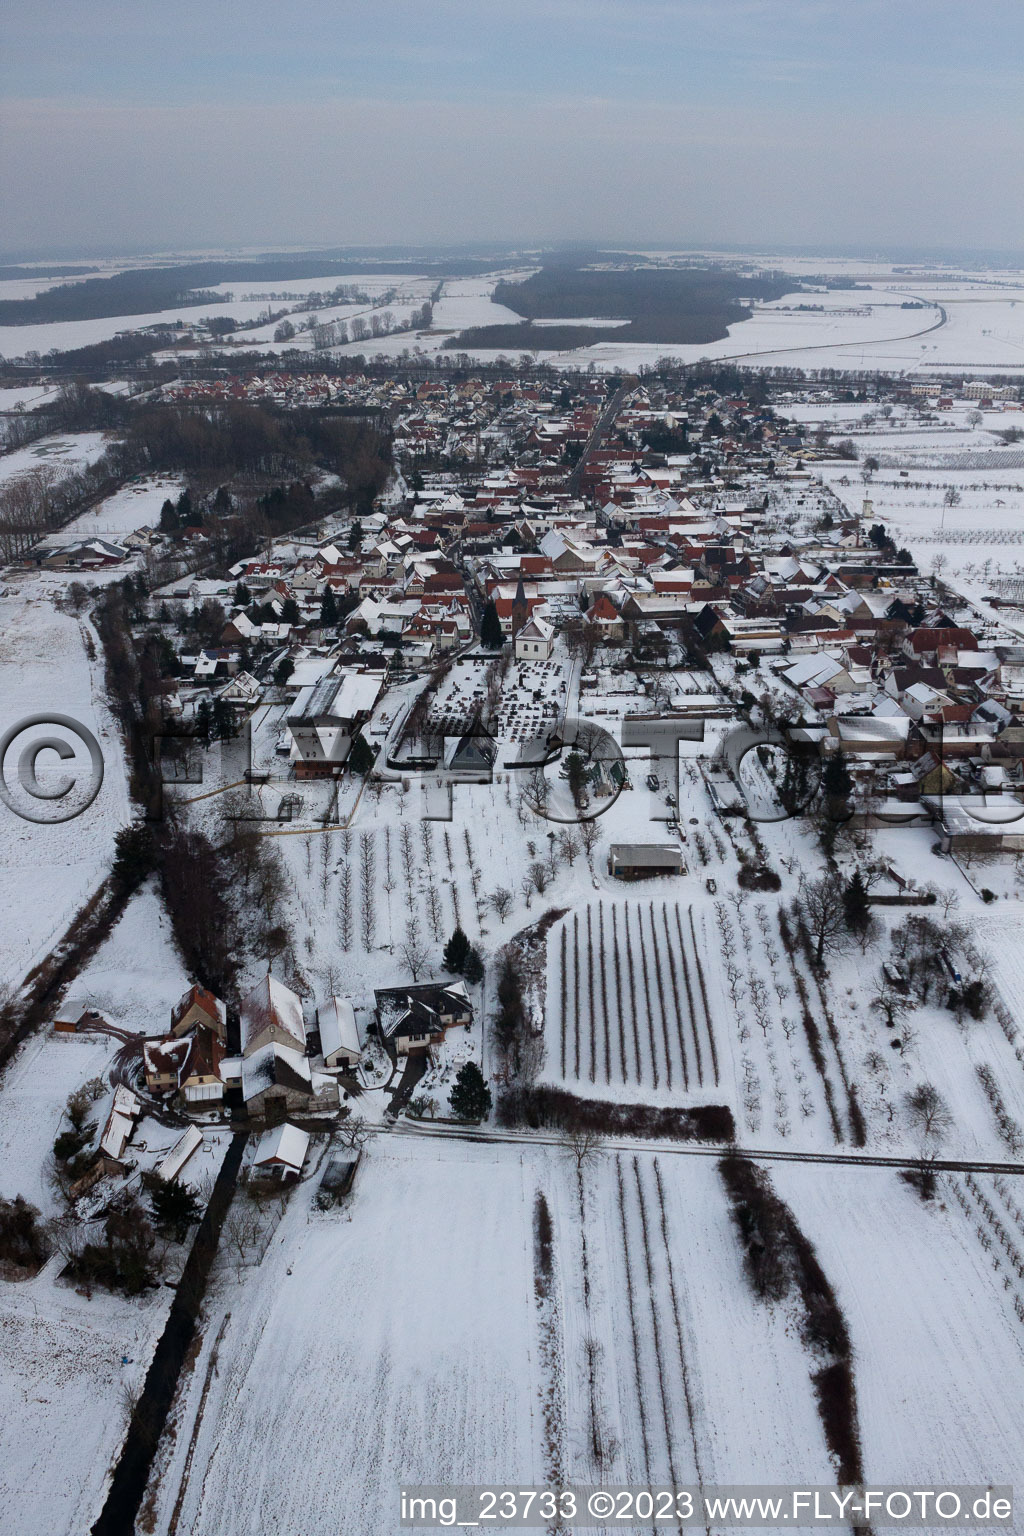 Bird's eye view of Winden in the state Rhineland-Palatinate, Germany